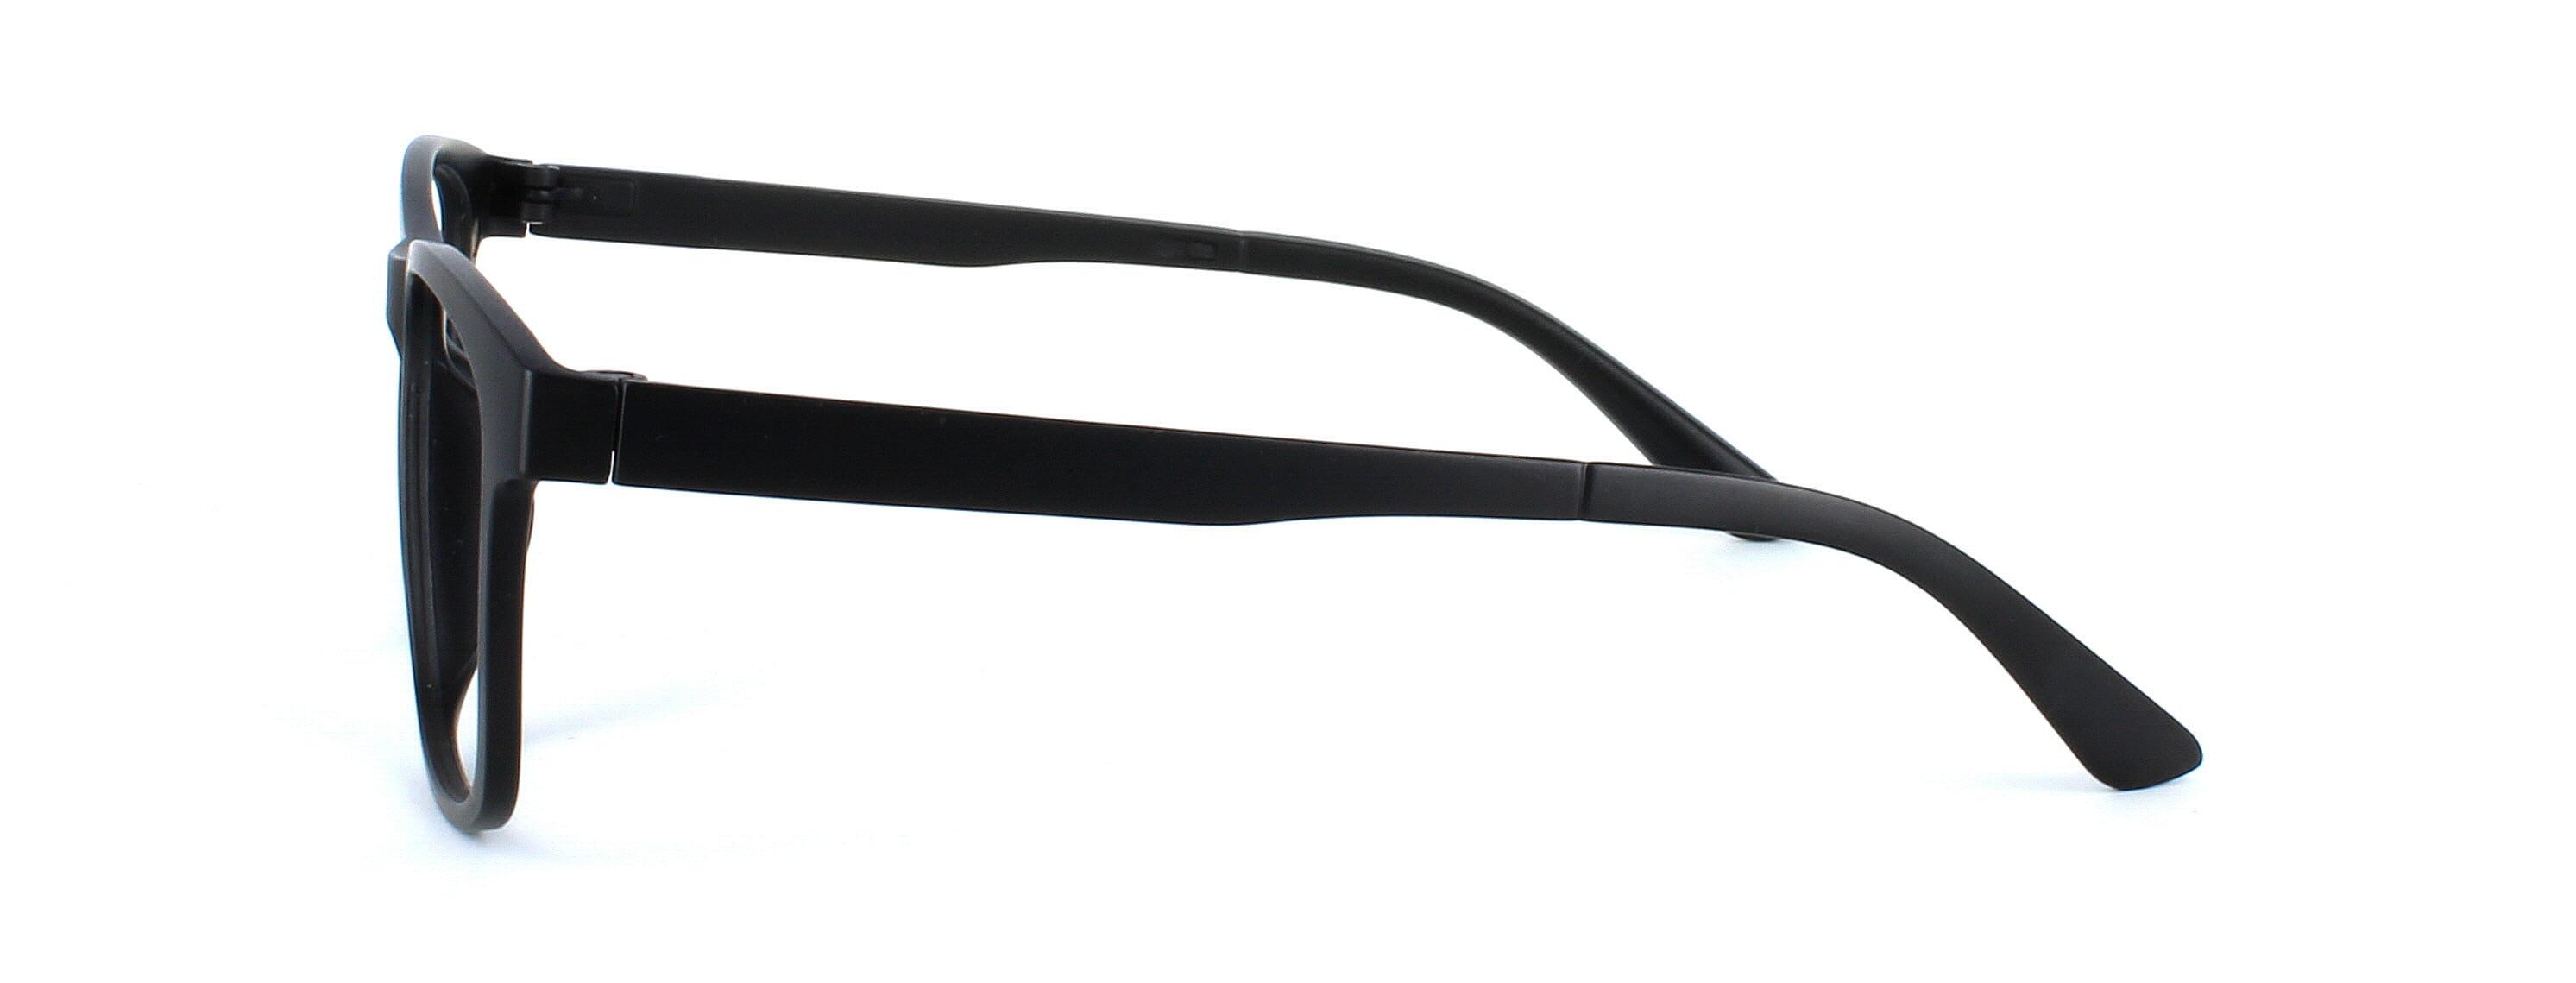 Unisex TR90 lightweight glasses with various clip on lenses - image view 4